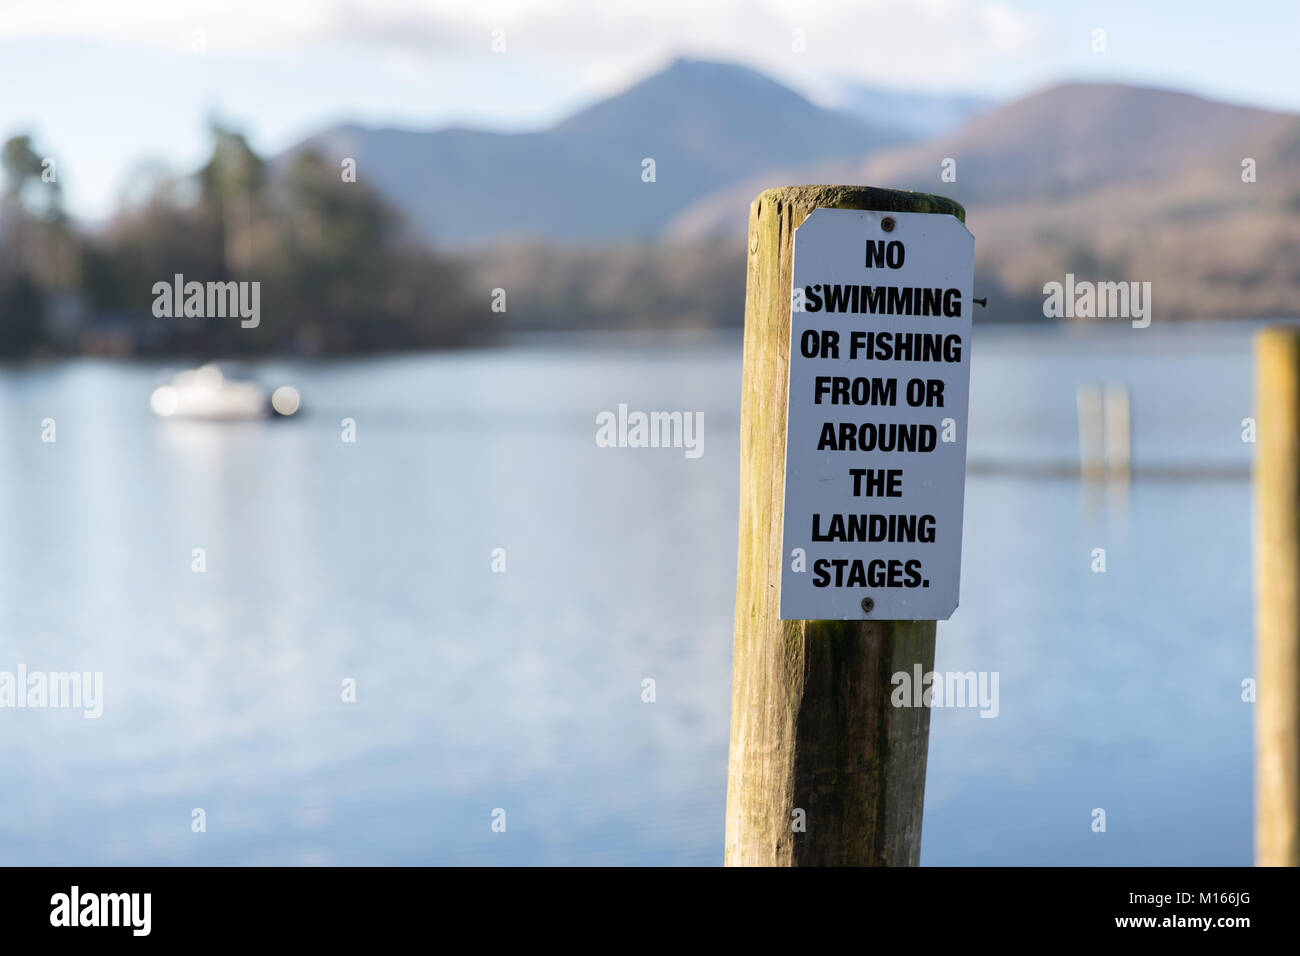 A No Swimming/Fishing warning sign on Derwent Water landing Stages near Keswick in the English Lake District National Park Stock Photo